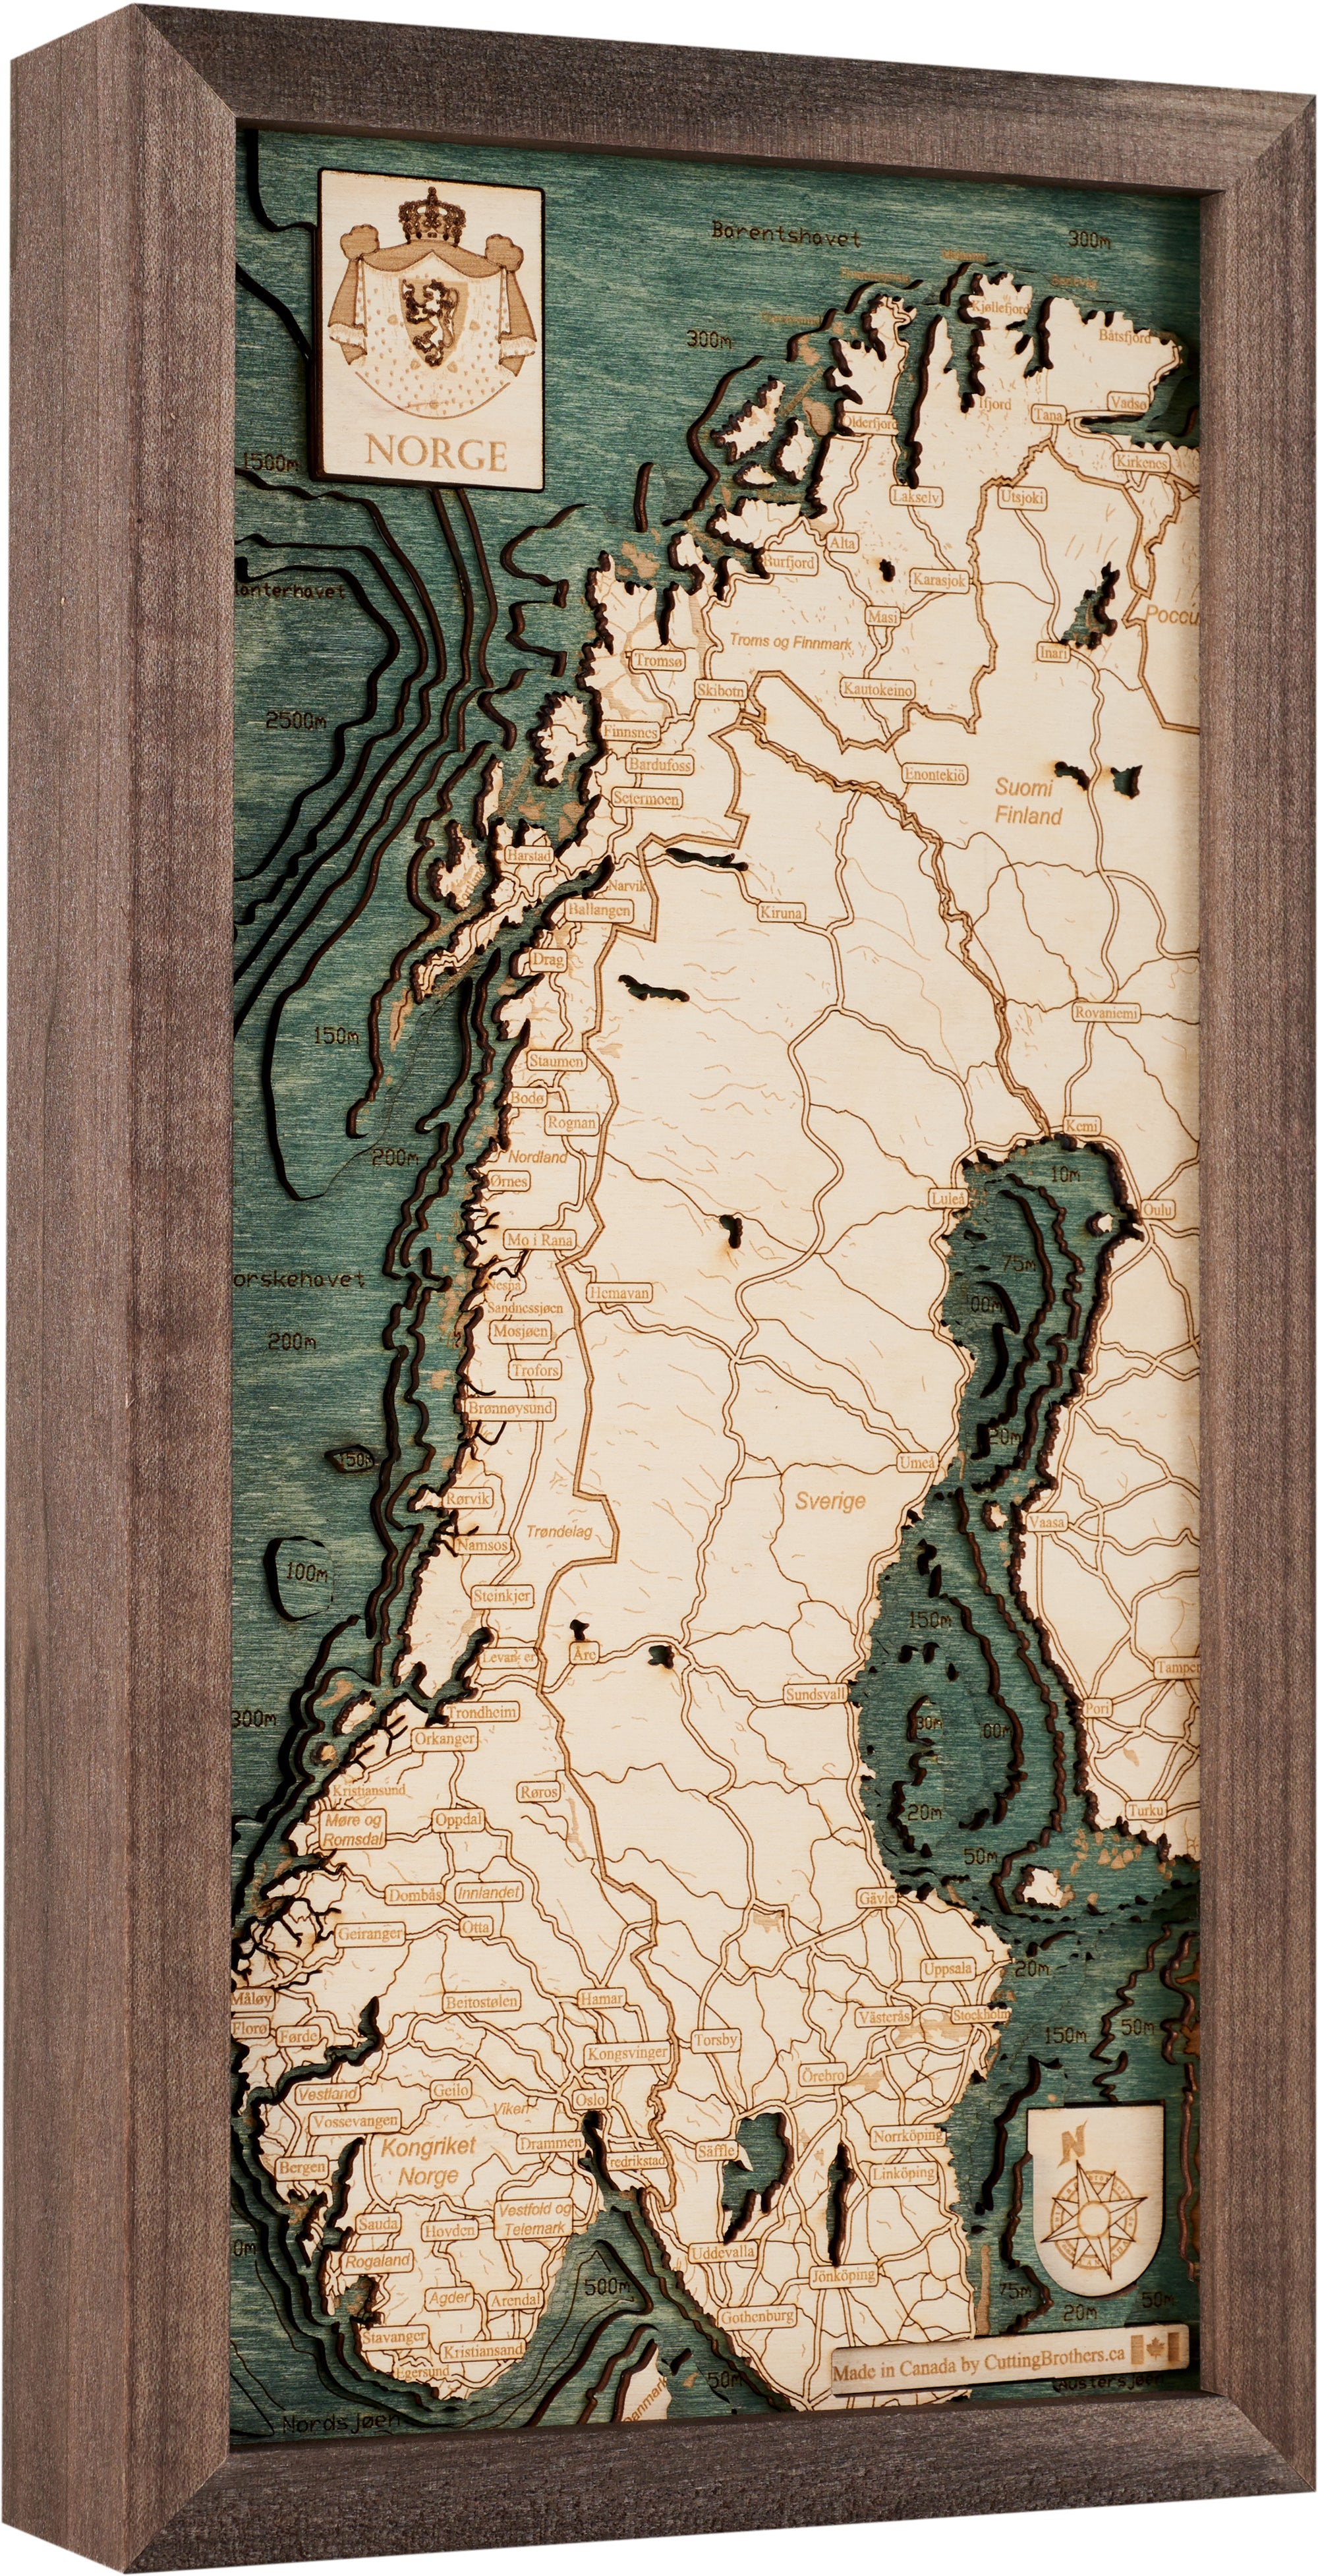 NORWAY 3D Wooden Wall Map - Version S 